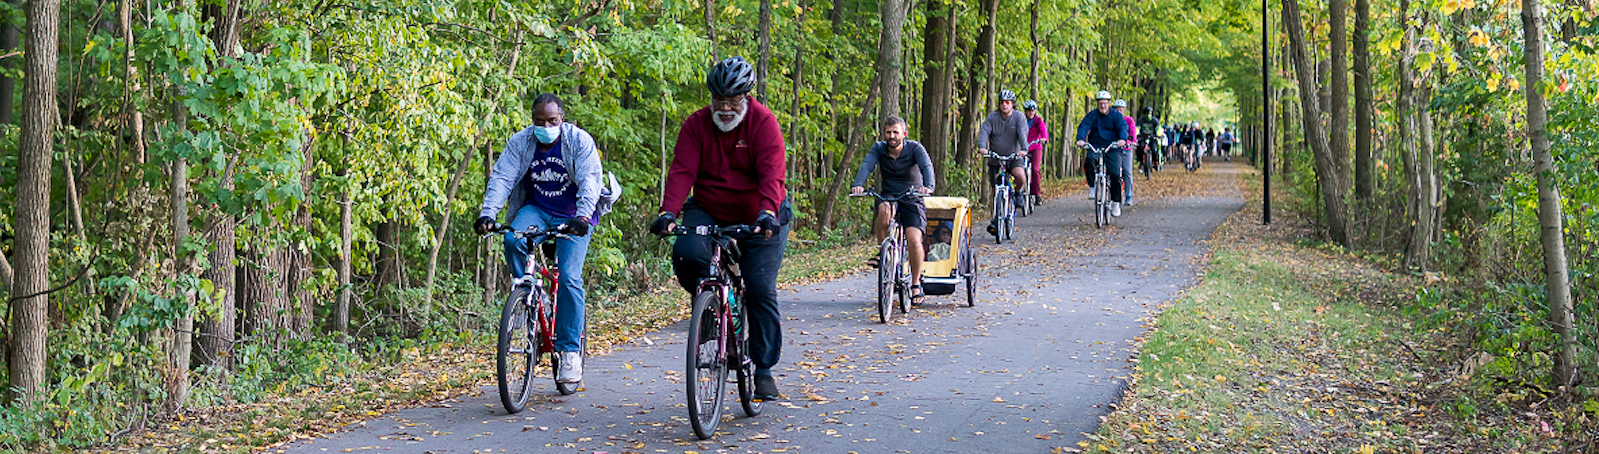 The City of Fort Wayne, New Haven, and Fort Wayne Trails host weekly family-friendly bike rides on Tuesday nights called Trek the Trails. 